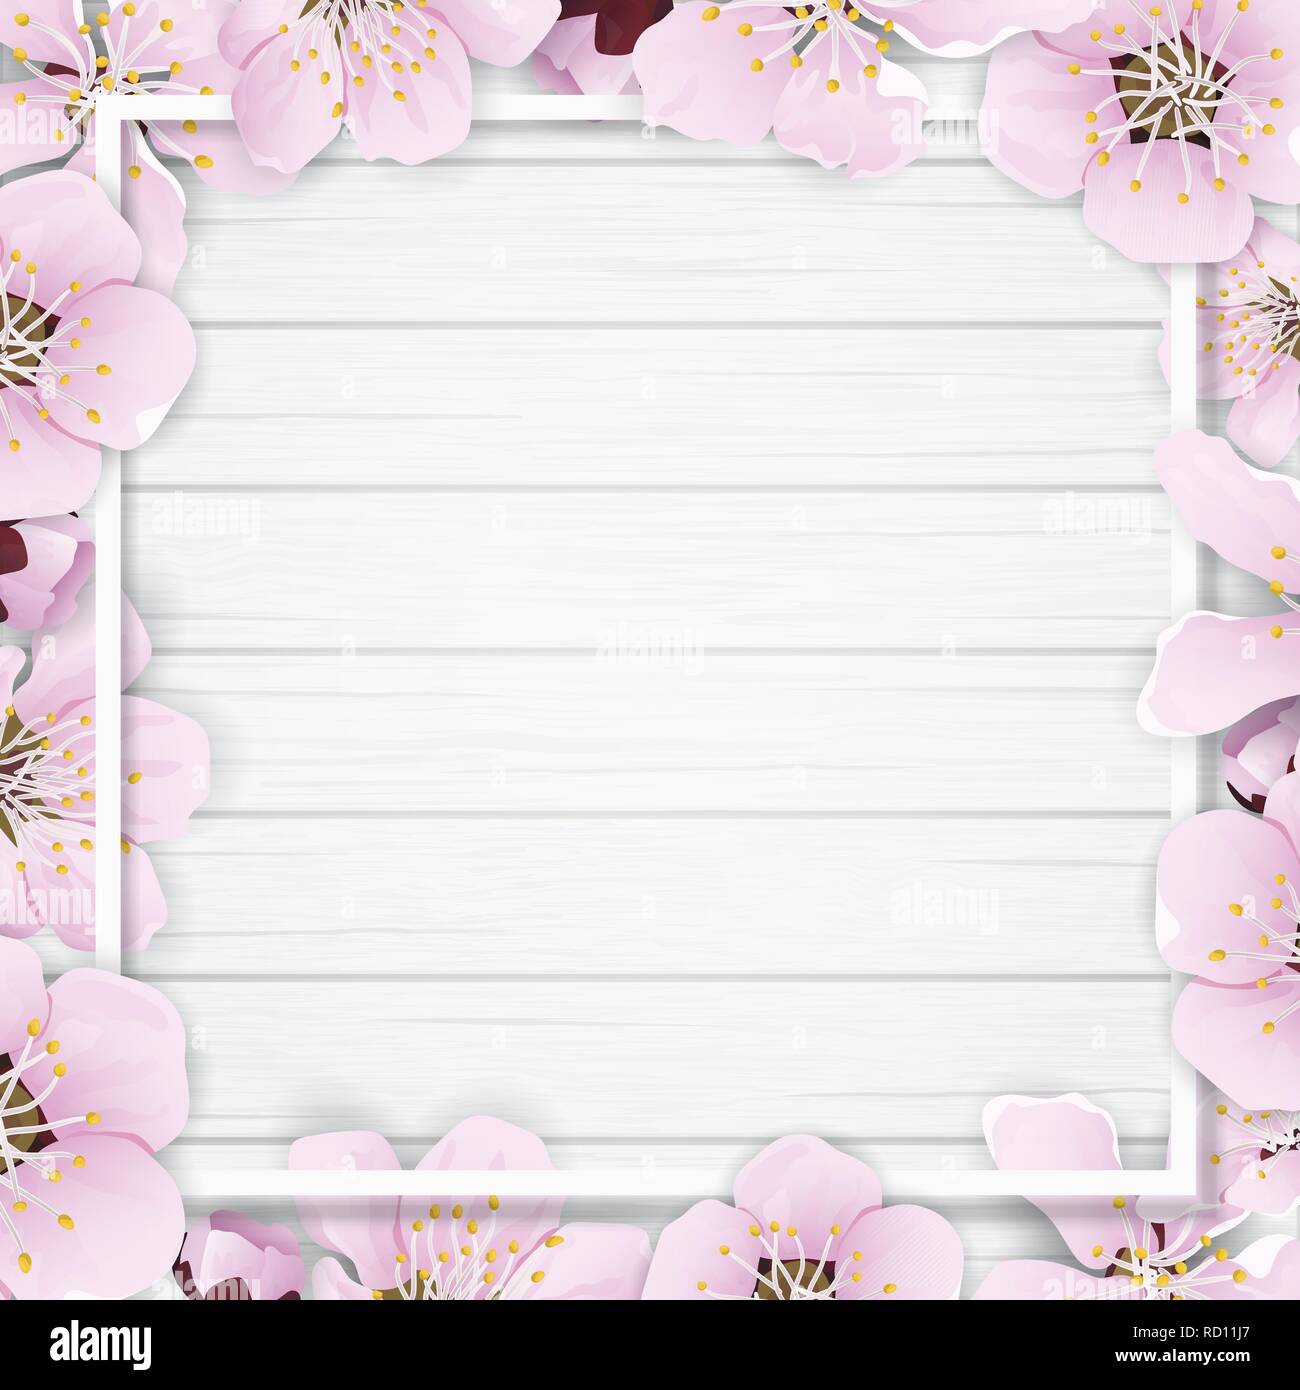 Spring frame with flowers on wooden background. Stock Vector